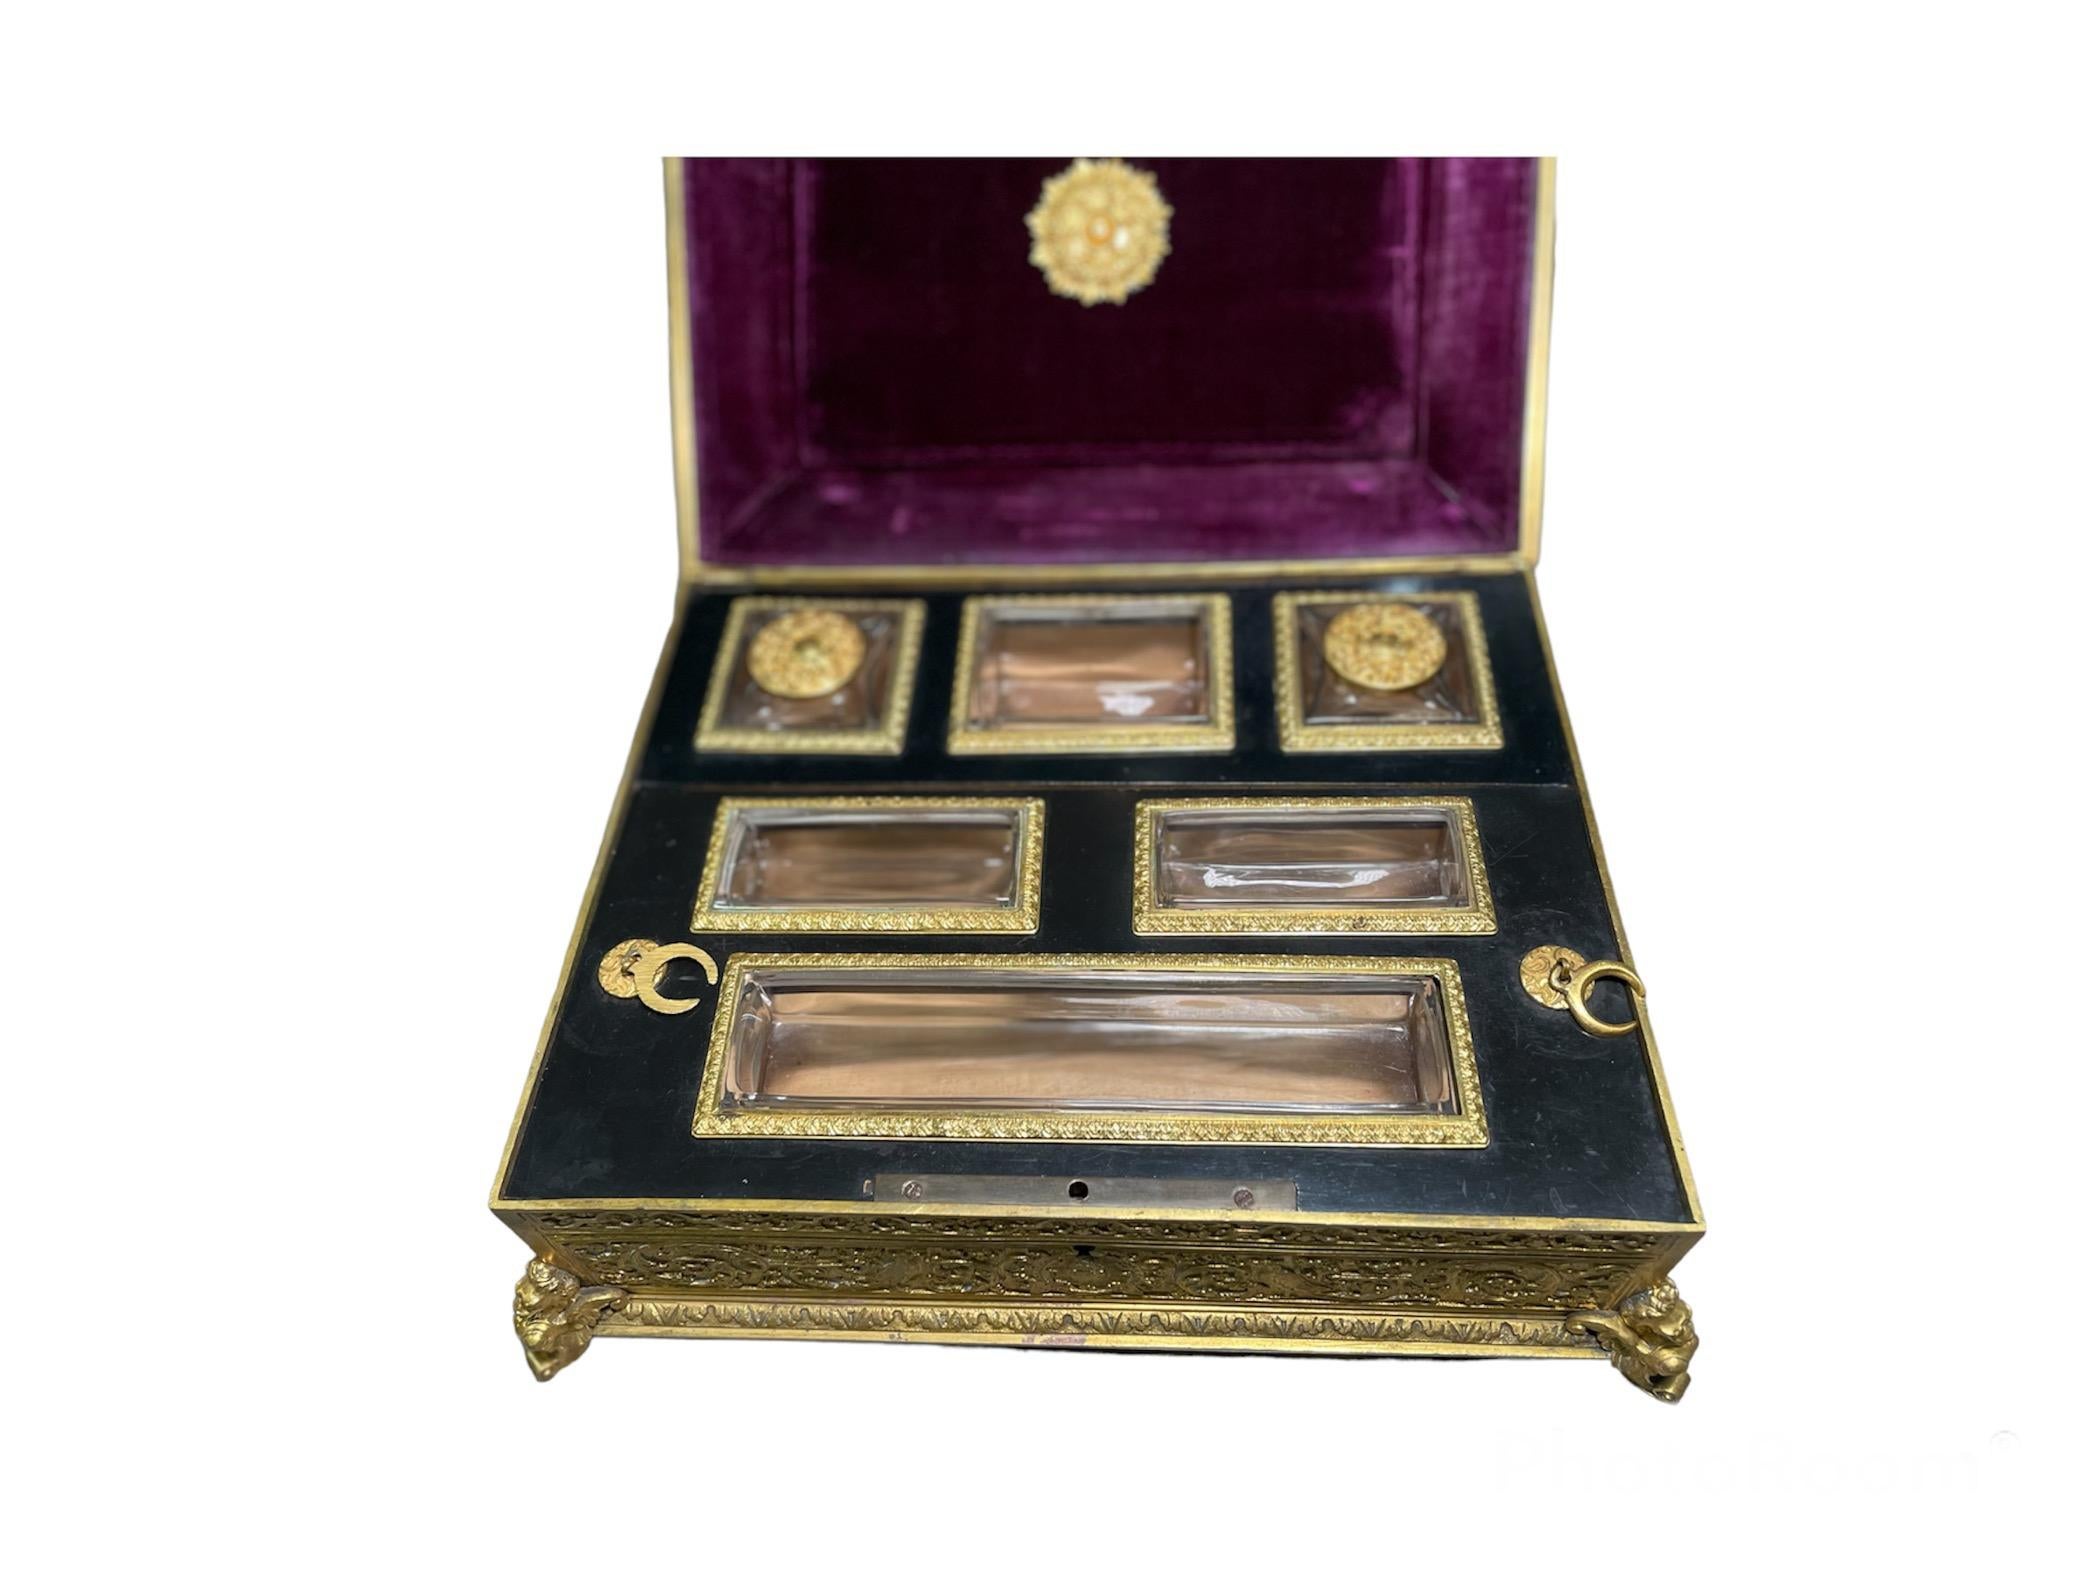 20th Century Renaissance Style Gilt Rectangular Casket , Jewelry, Desk and /or Decorative Box For Sale